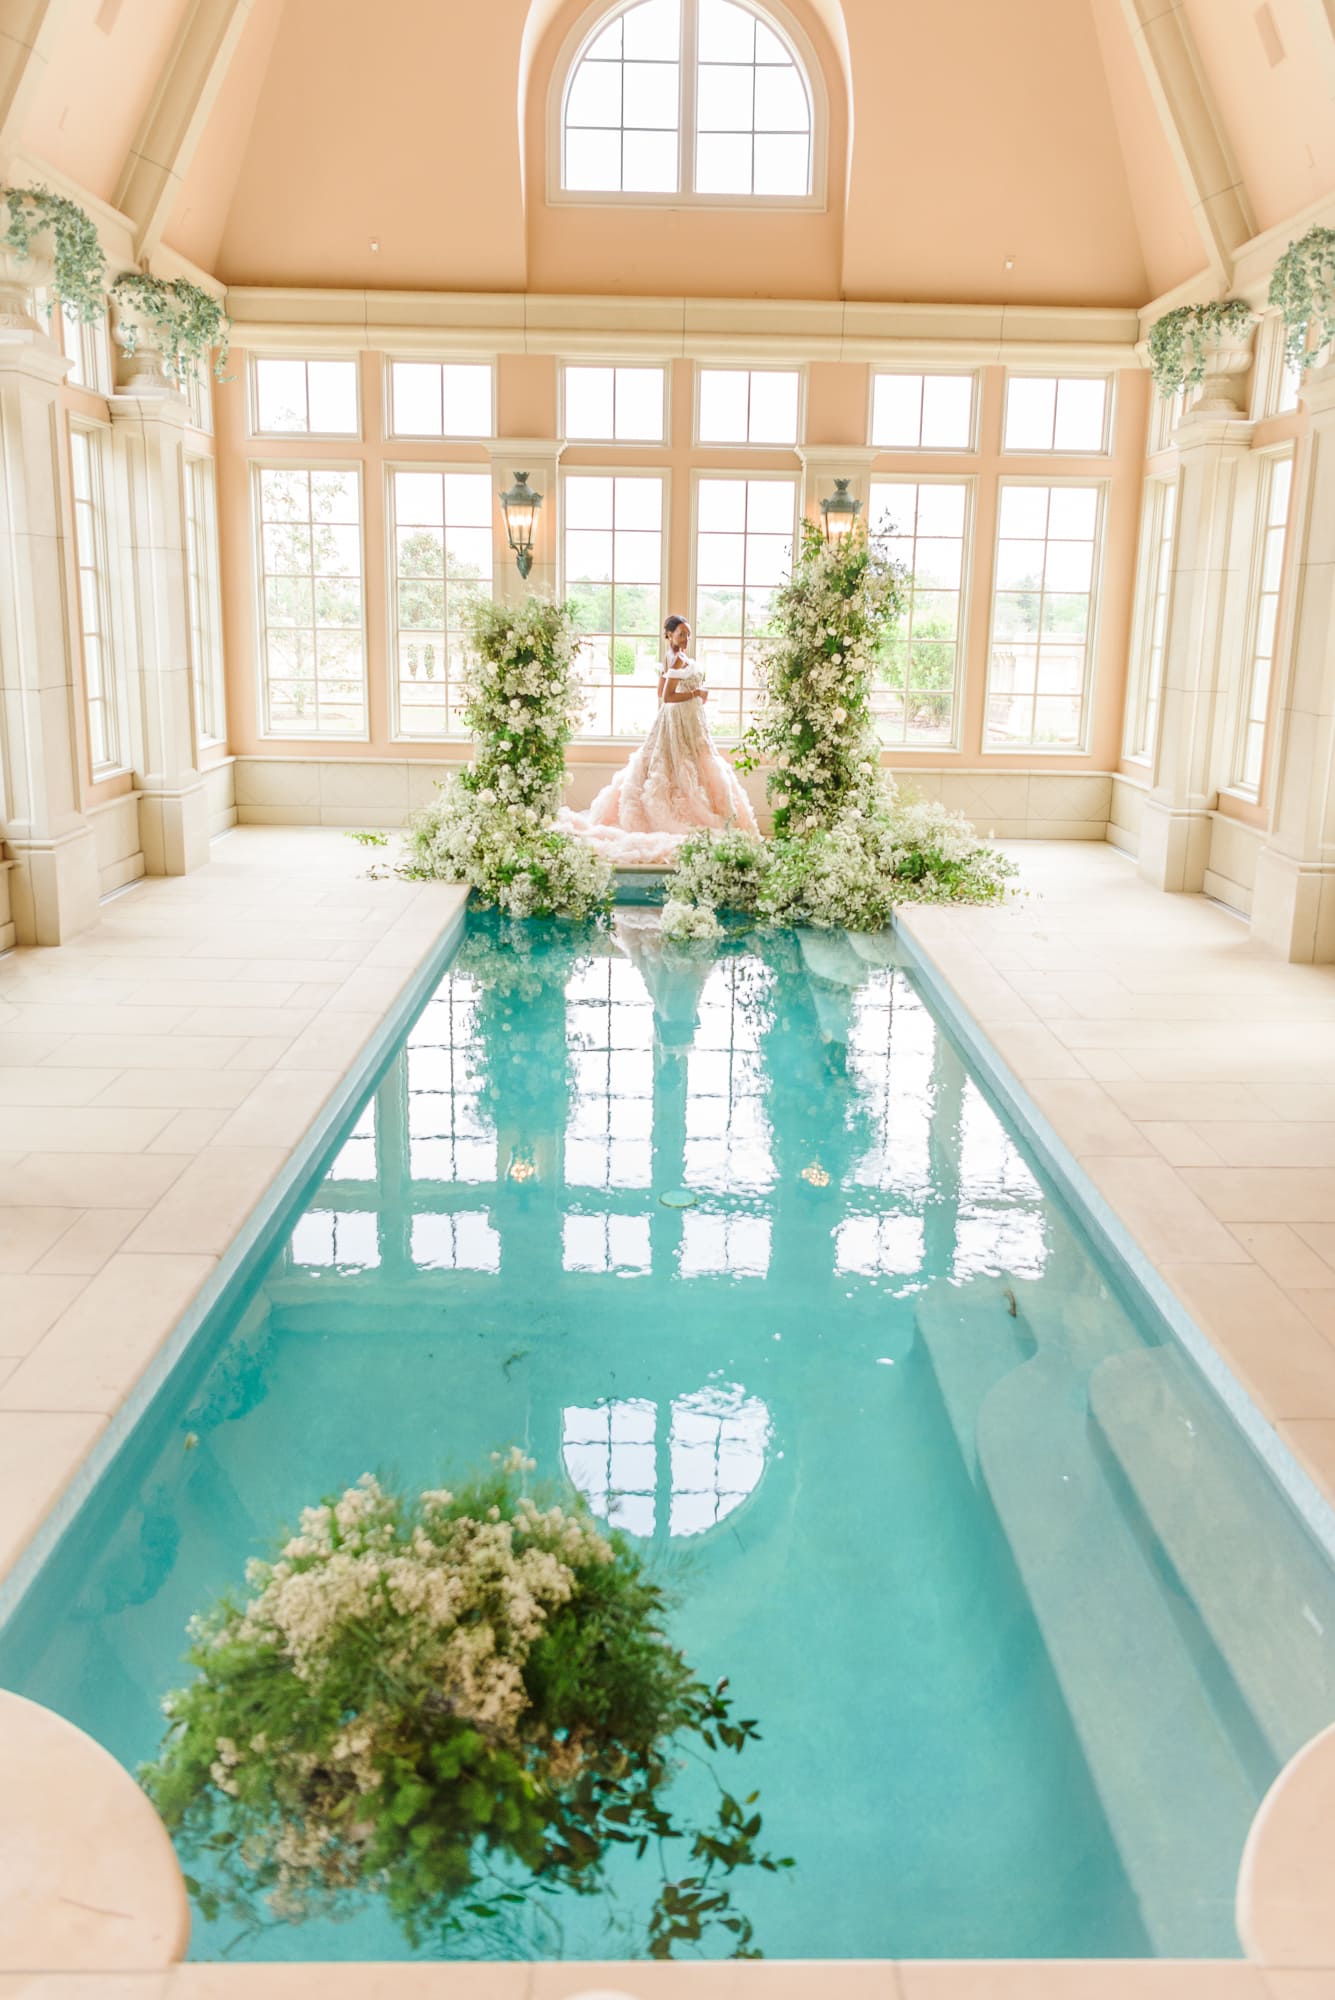 An amazing poolside picture idea would be to float bunches of flowers in the pool, as shown here.